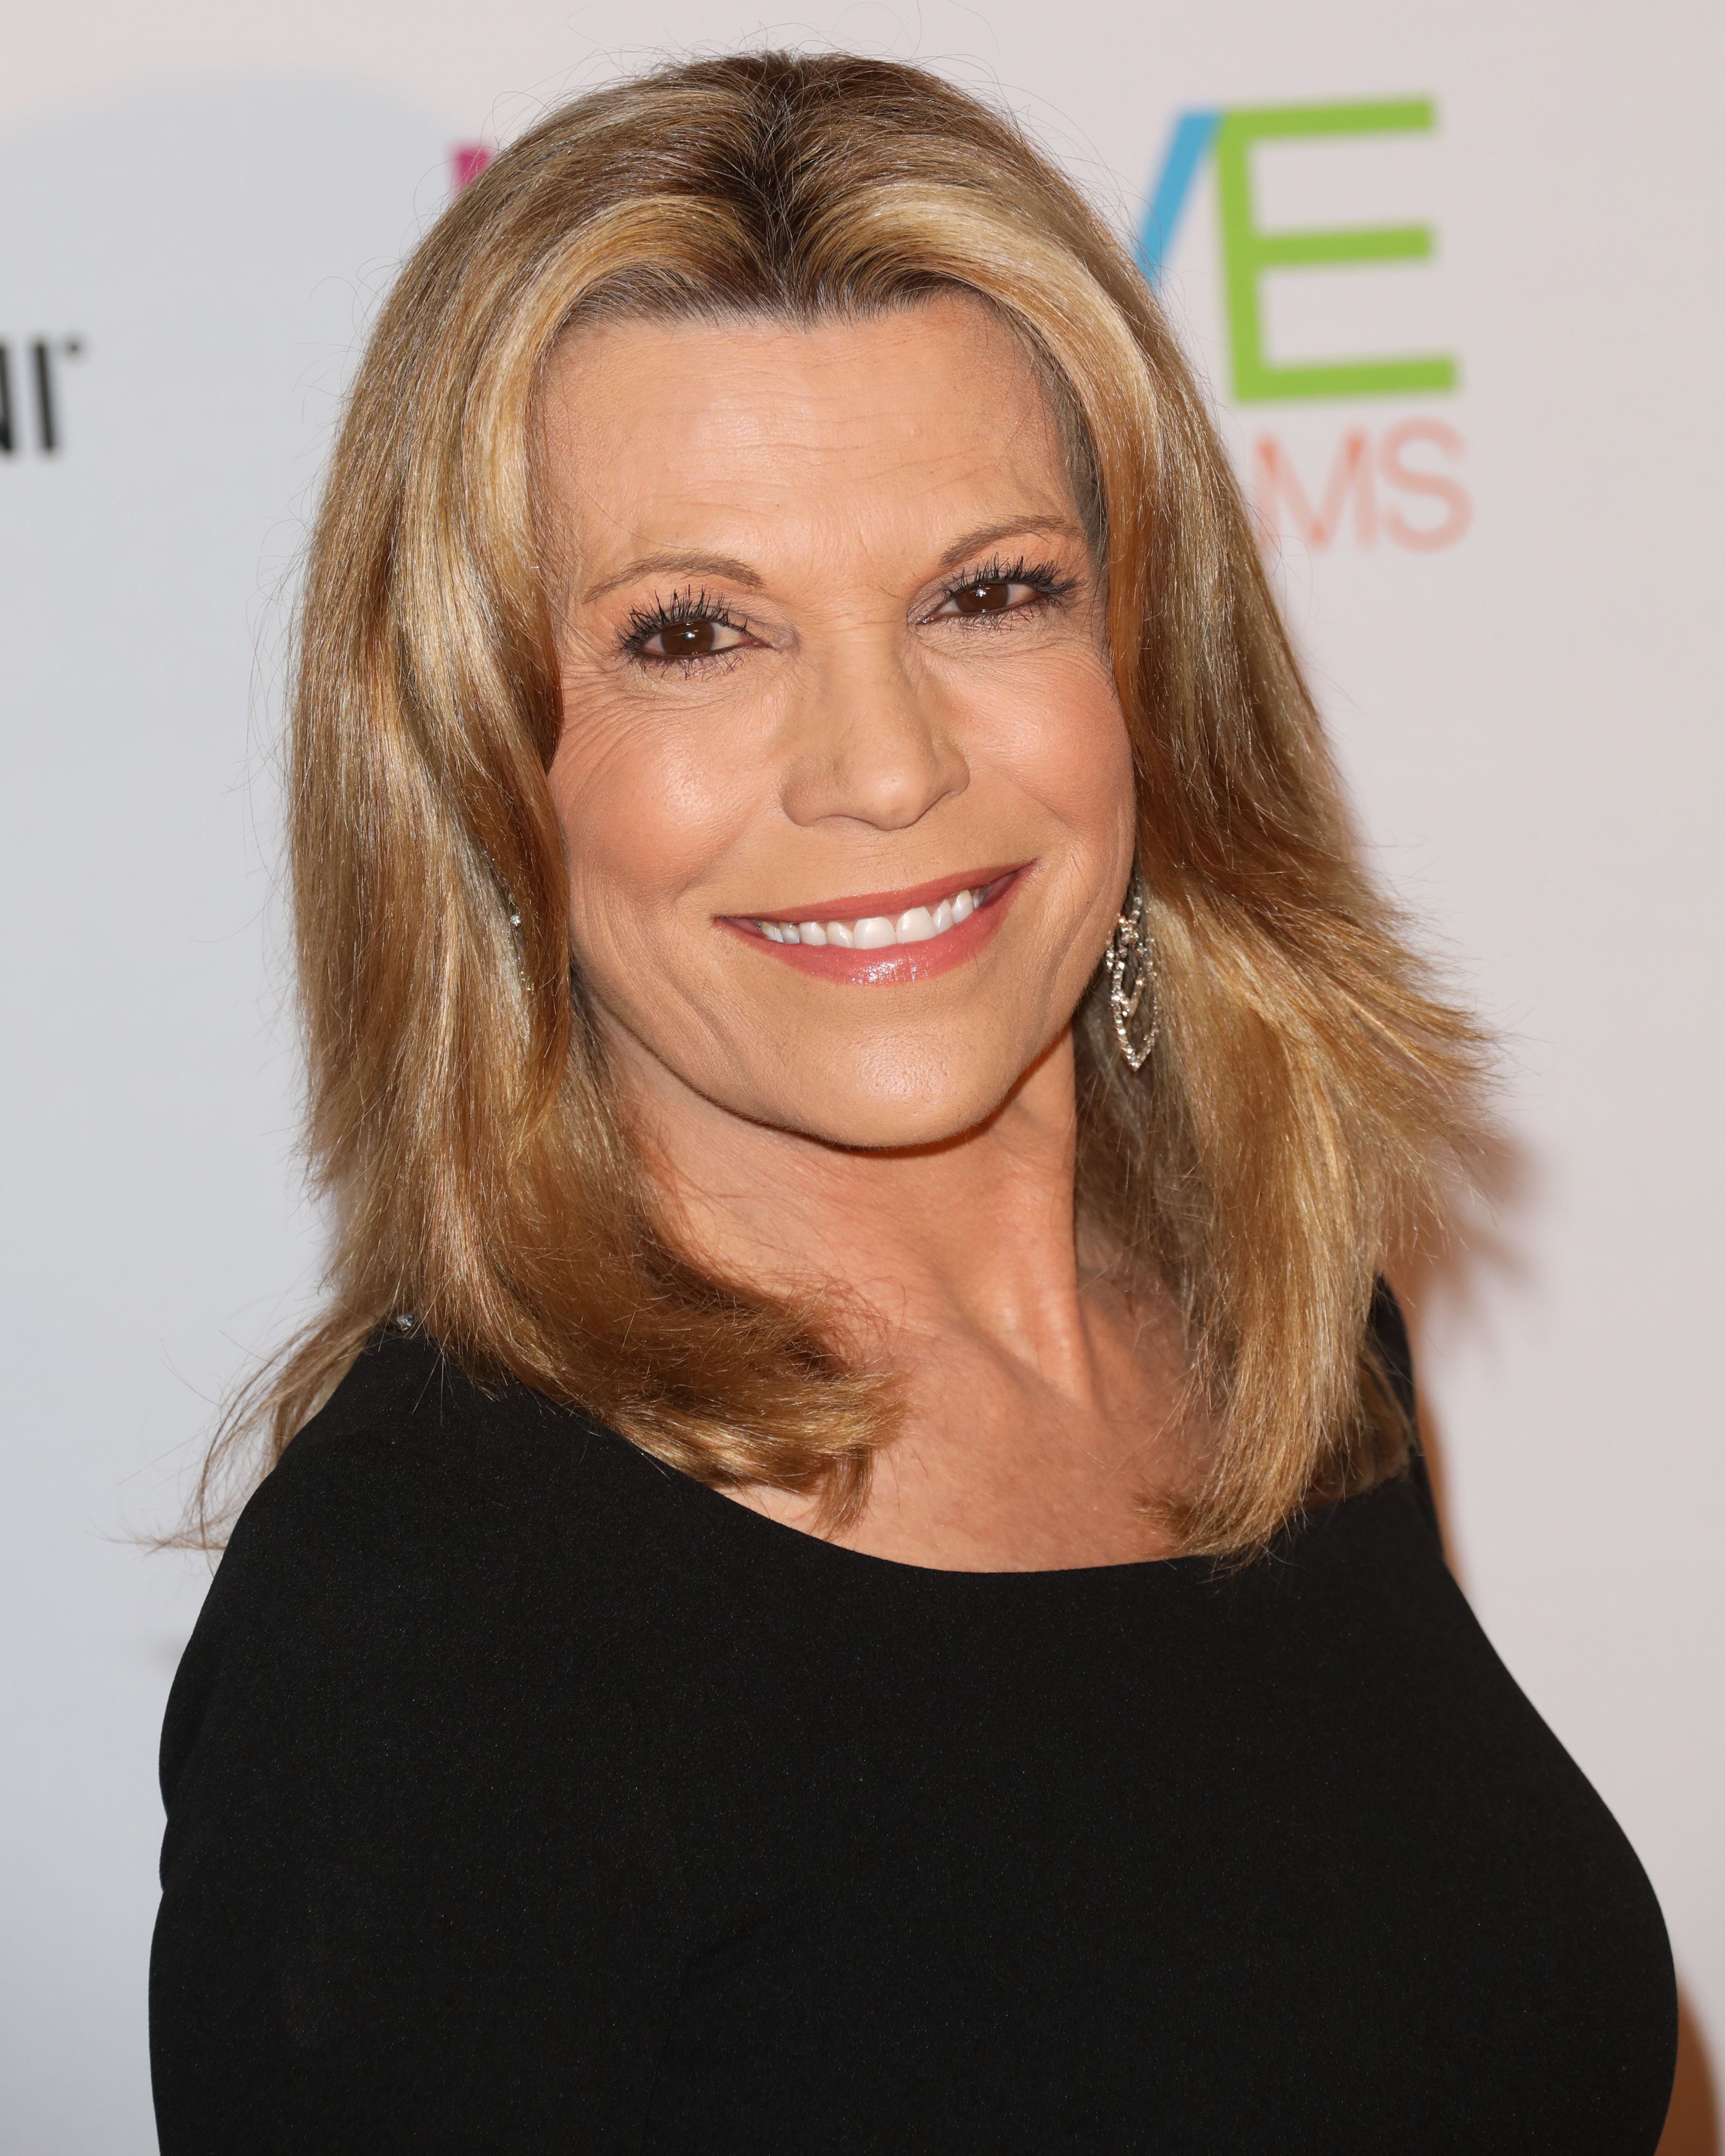 how old is vanna white